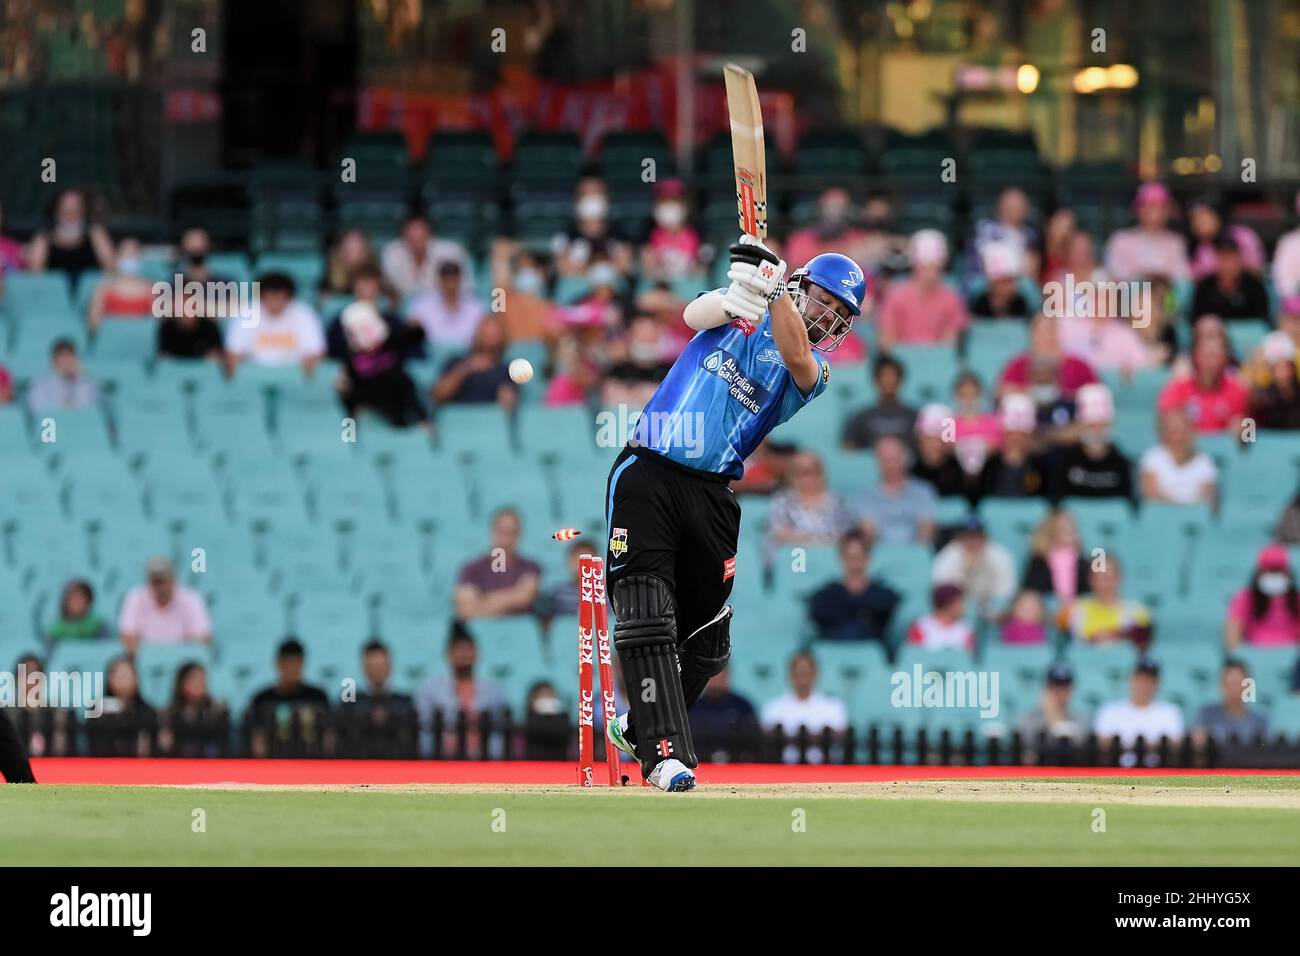 Sydney, Australia, 26 January, 2022. Travis Head of the Strikers gets bowled out during the Big Bash League Challenger cricket match between Sydney Sixers and Adelaide Strikers at The Sydney Cricket Ground on January 26, 2022 in Sydney, Australia. Credit: Steven Markham/Speed Media/Alamy Live News Stock Photo